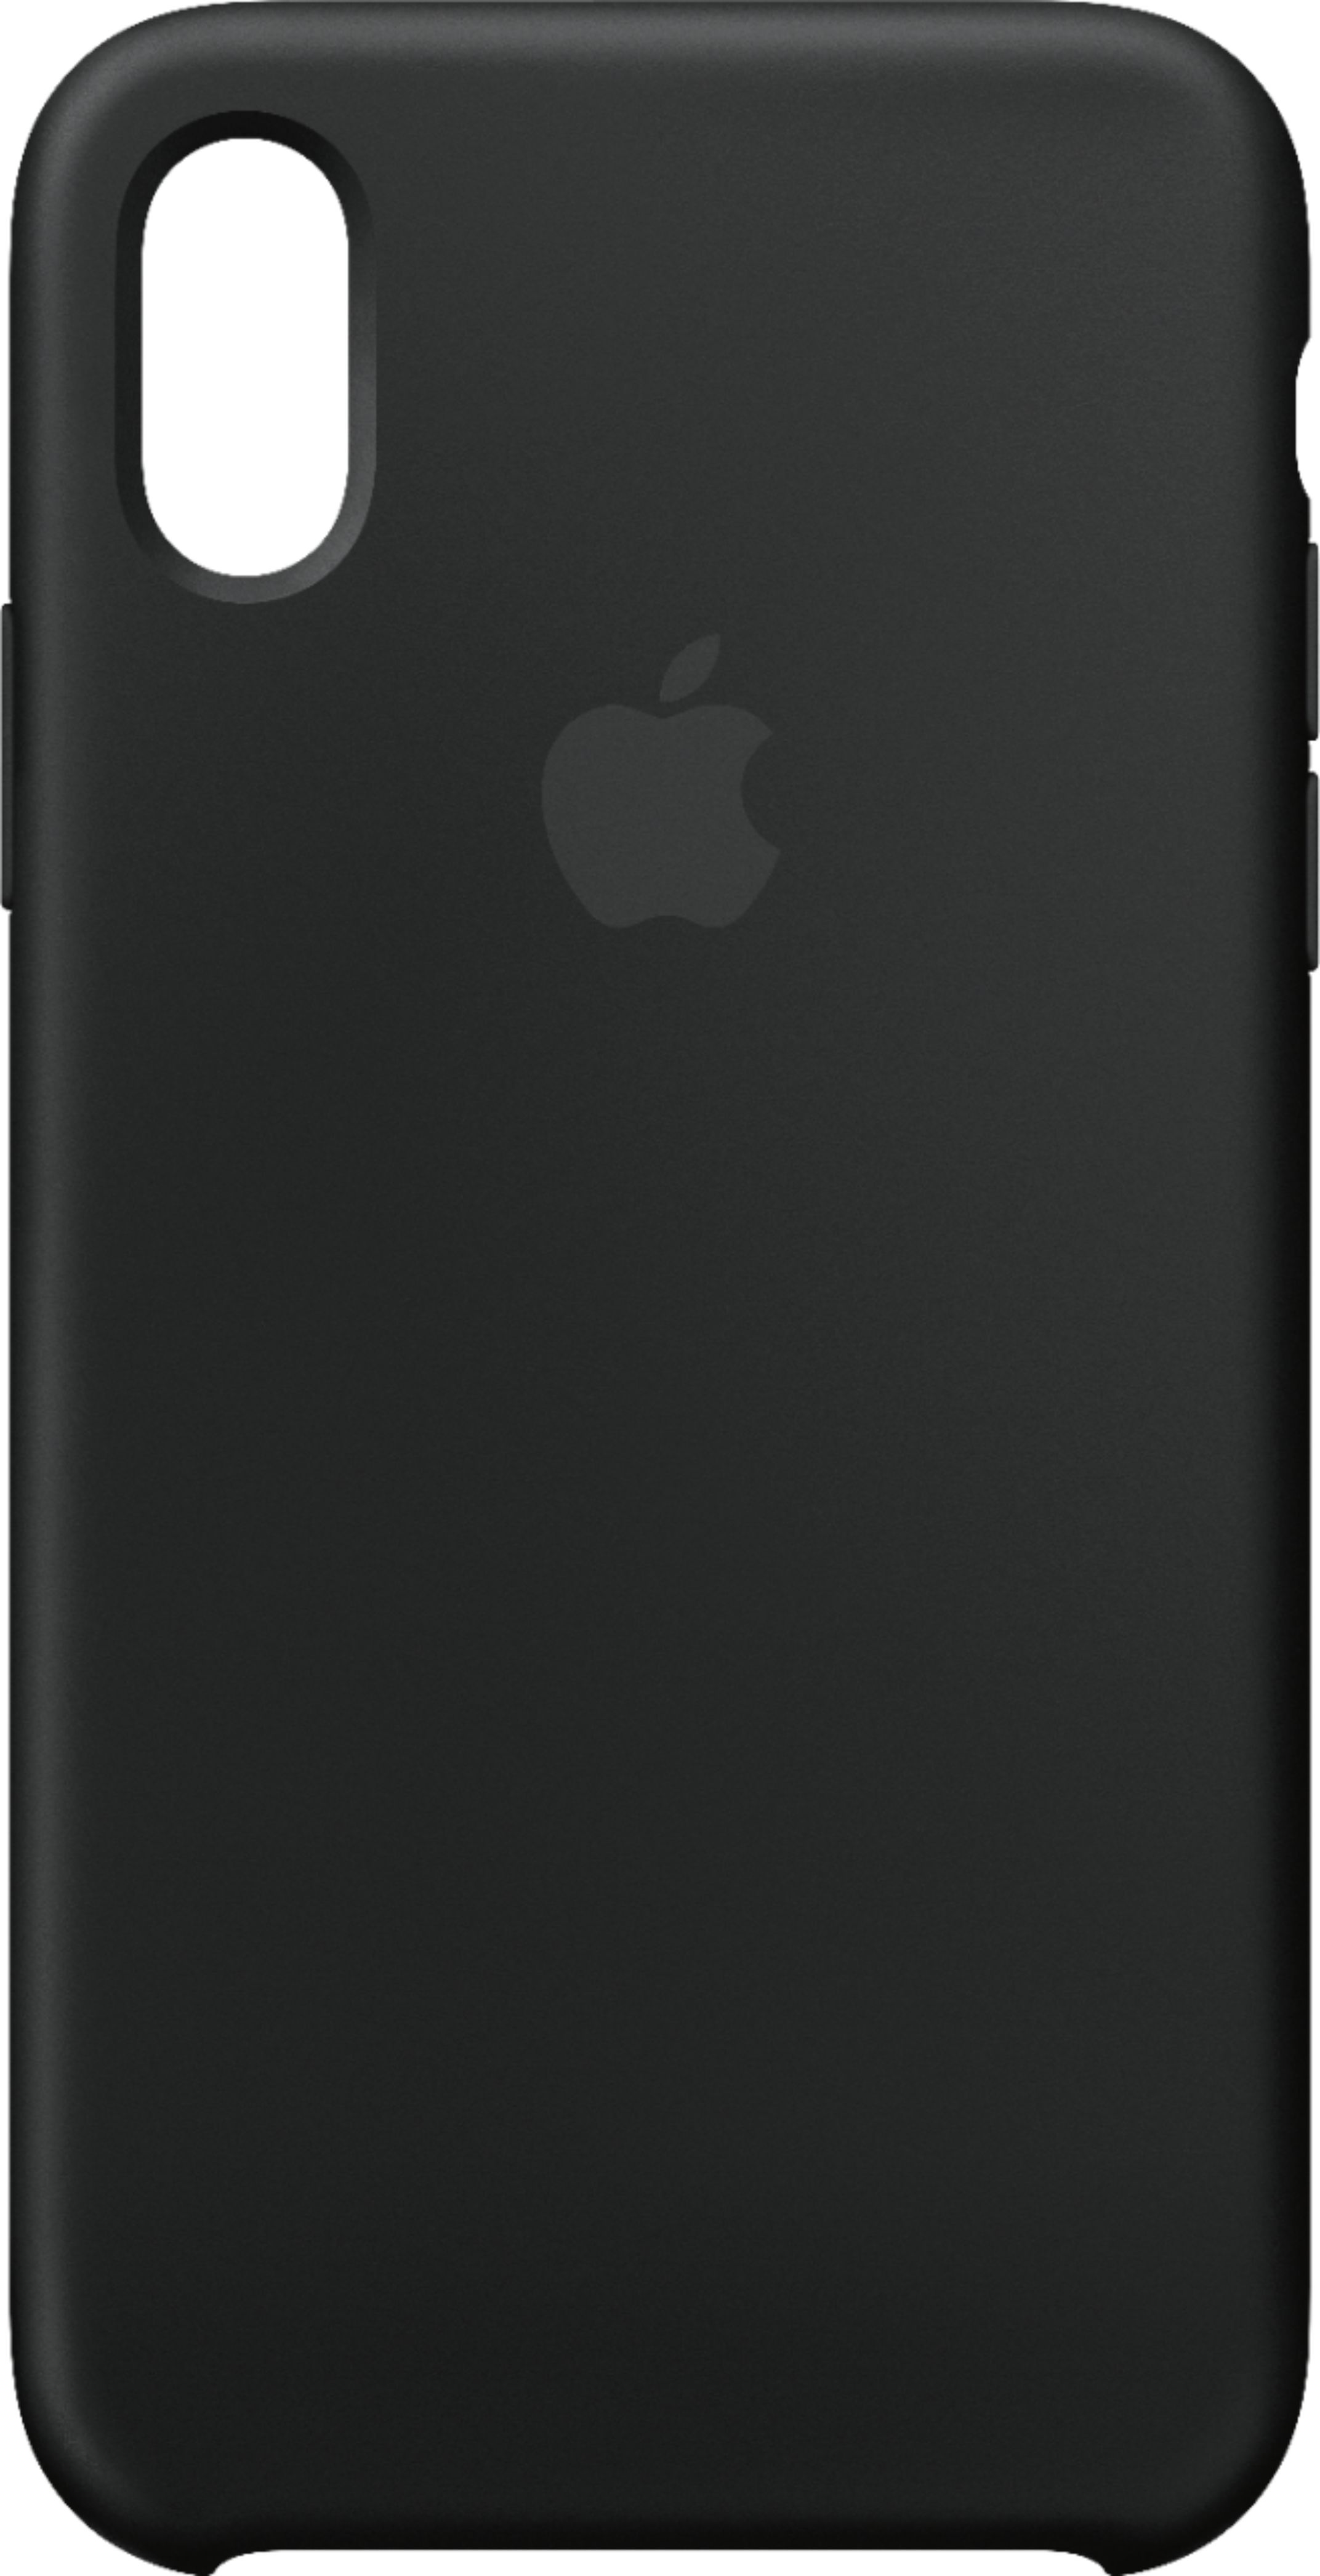 Best Buy Apple Iphone Xs Silicone Case Black Mrw72zm A